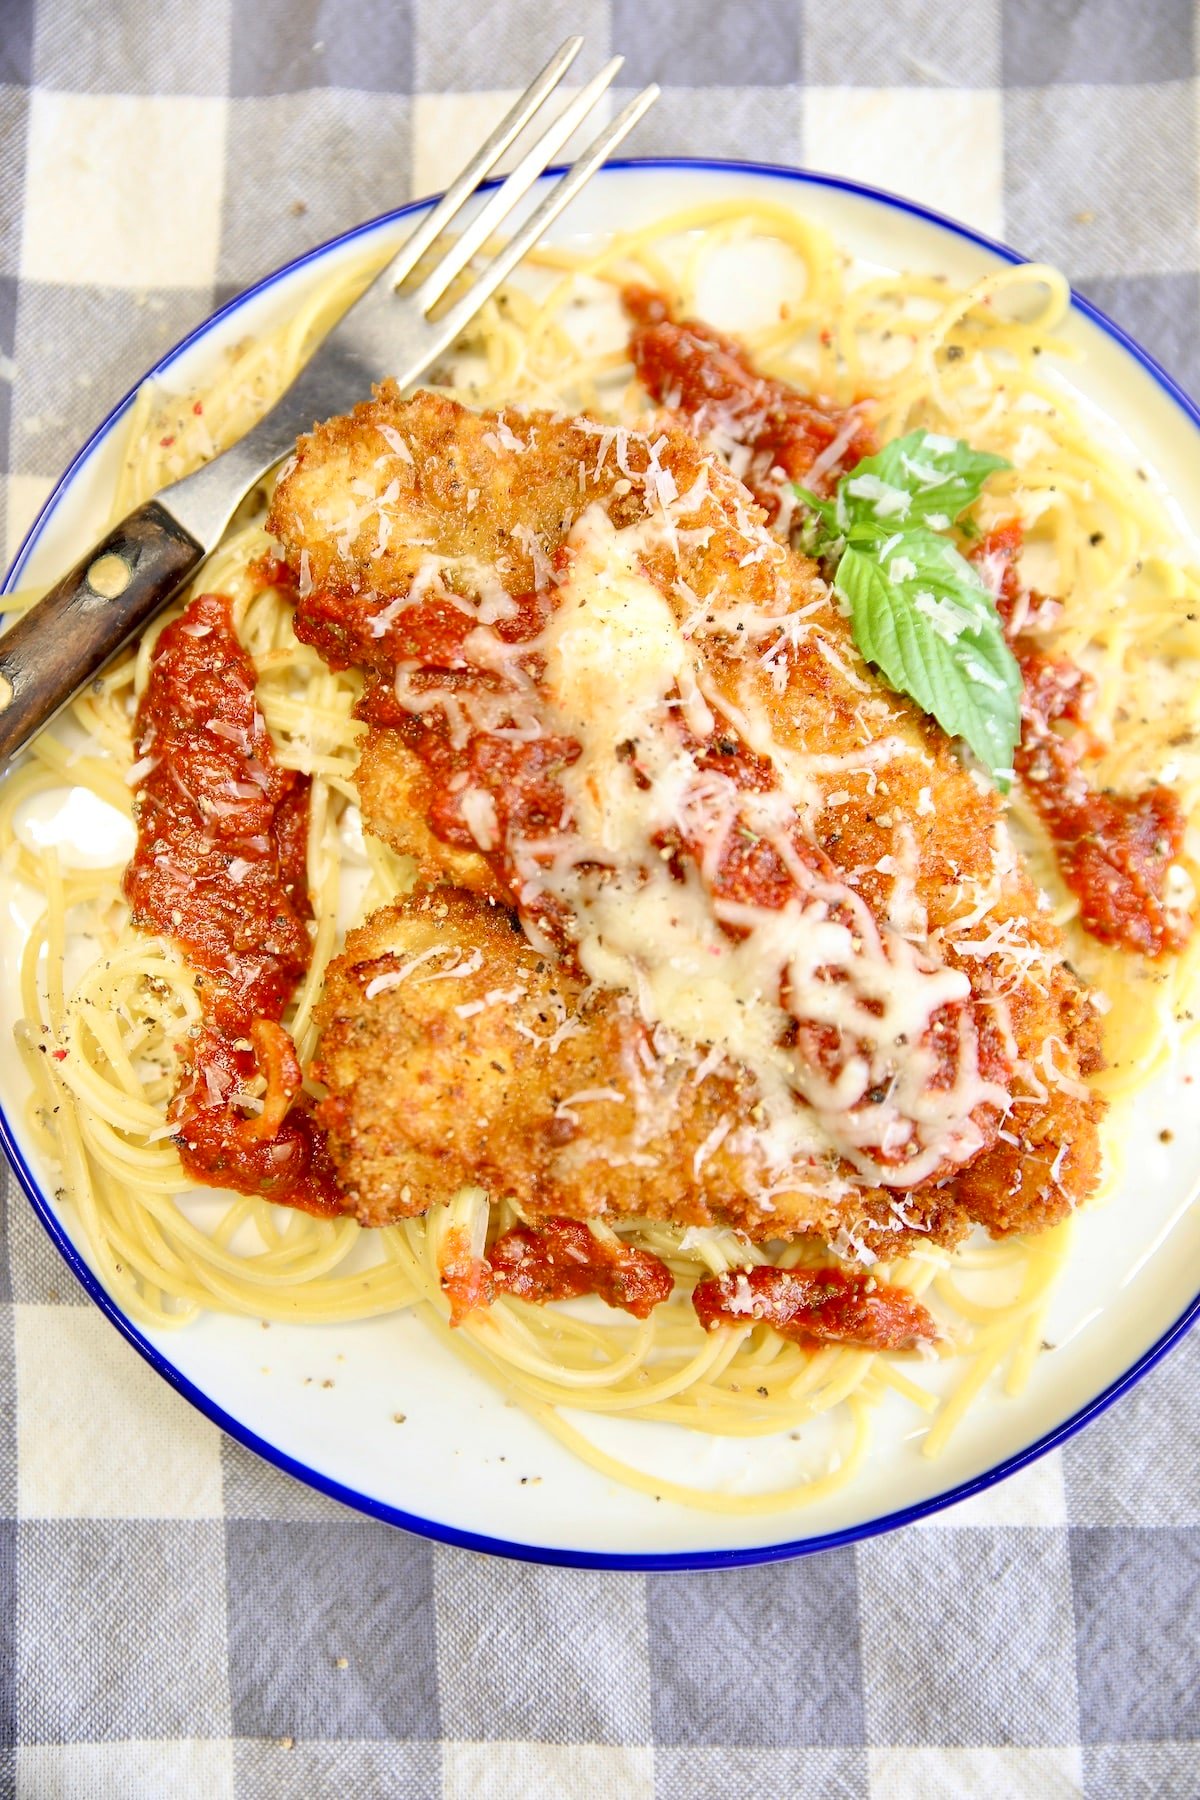 Plate of chicken parmesan with spaghetti.